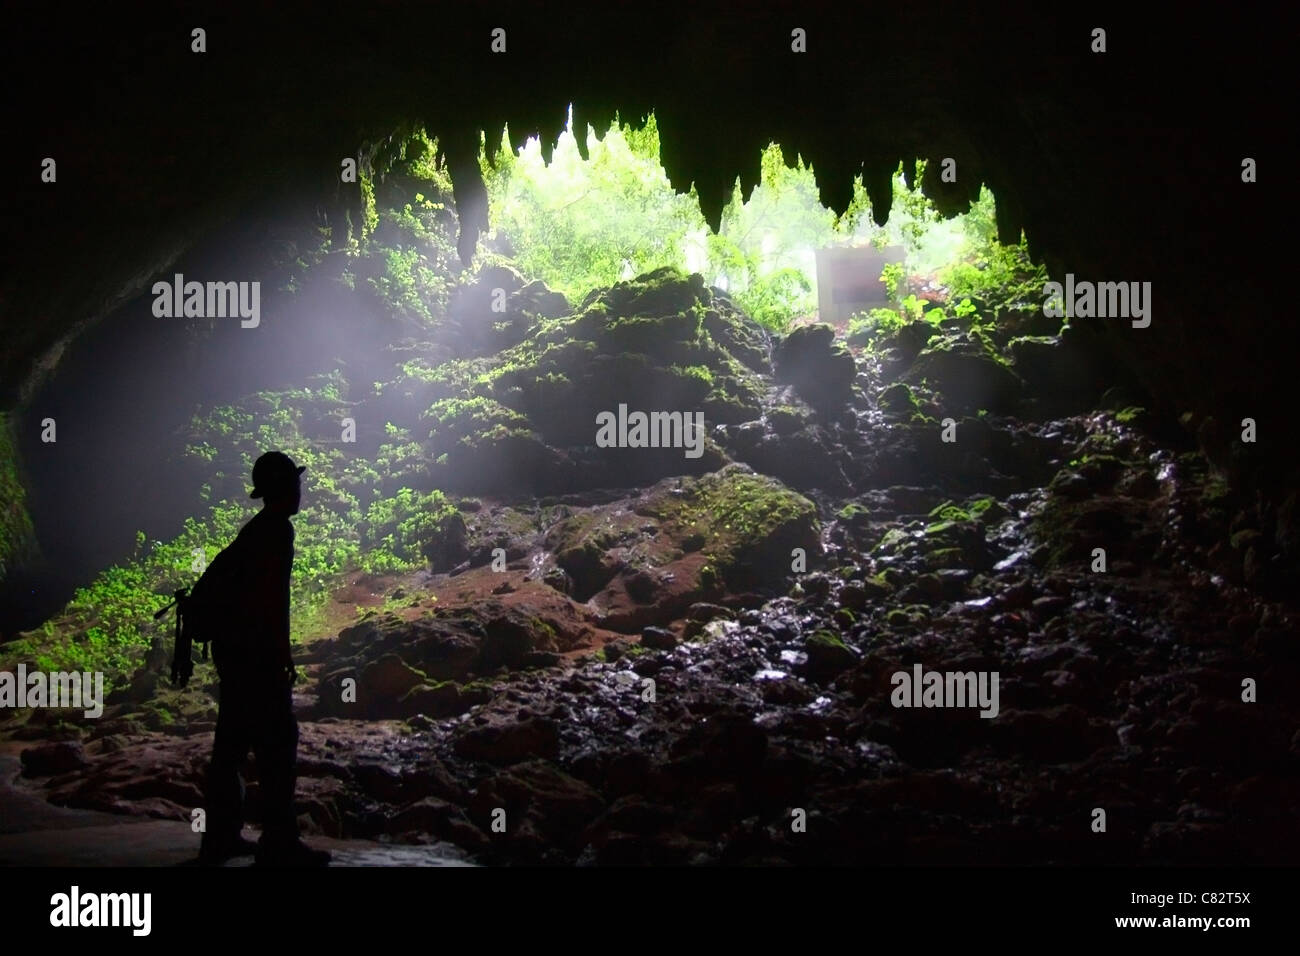 The Camuy caves in Puerto Rico. Stock Photo